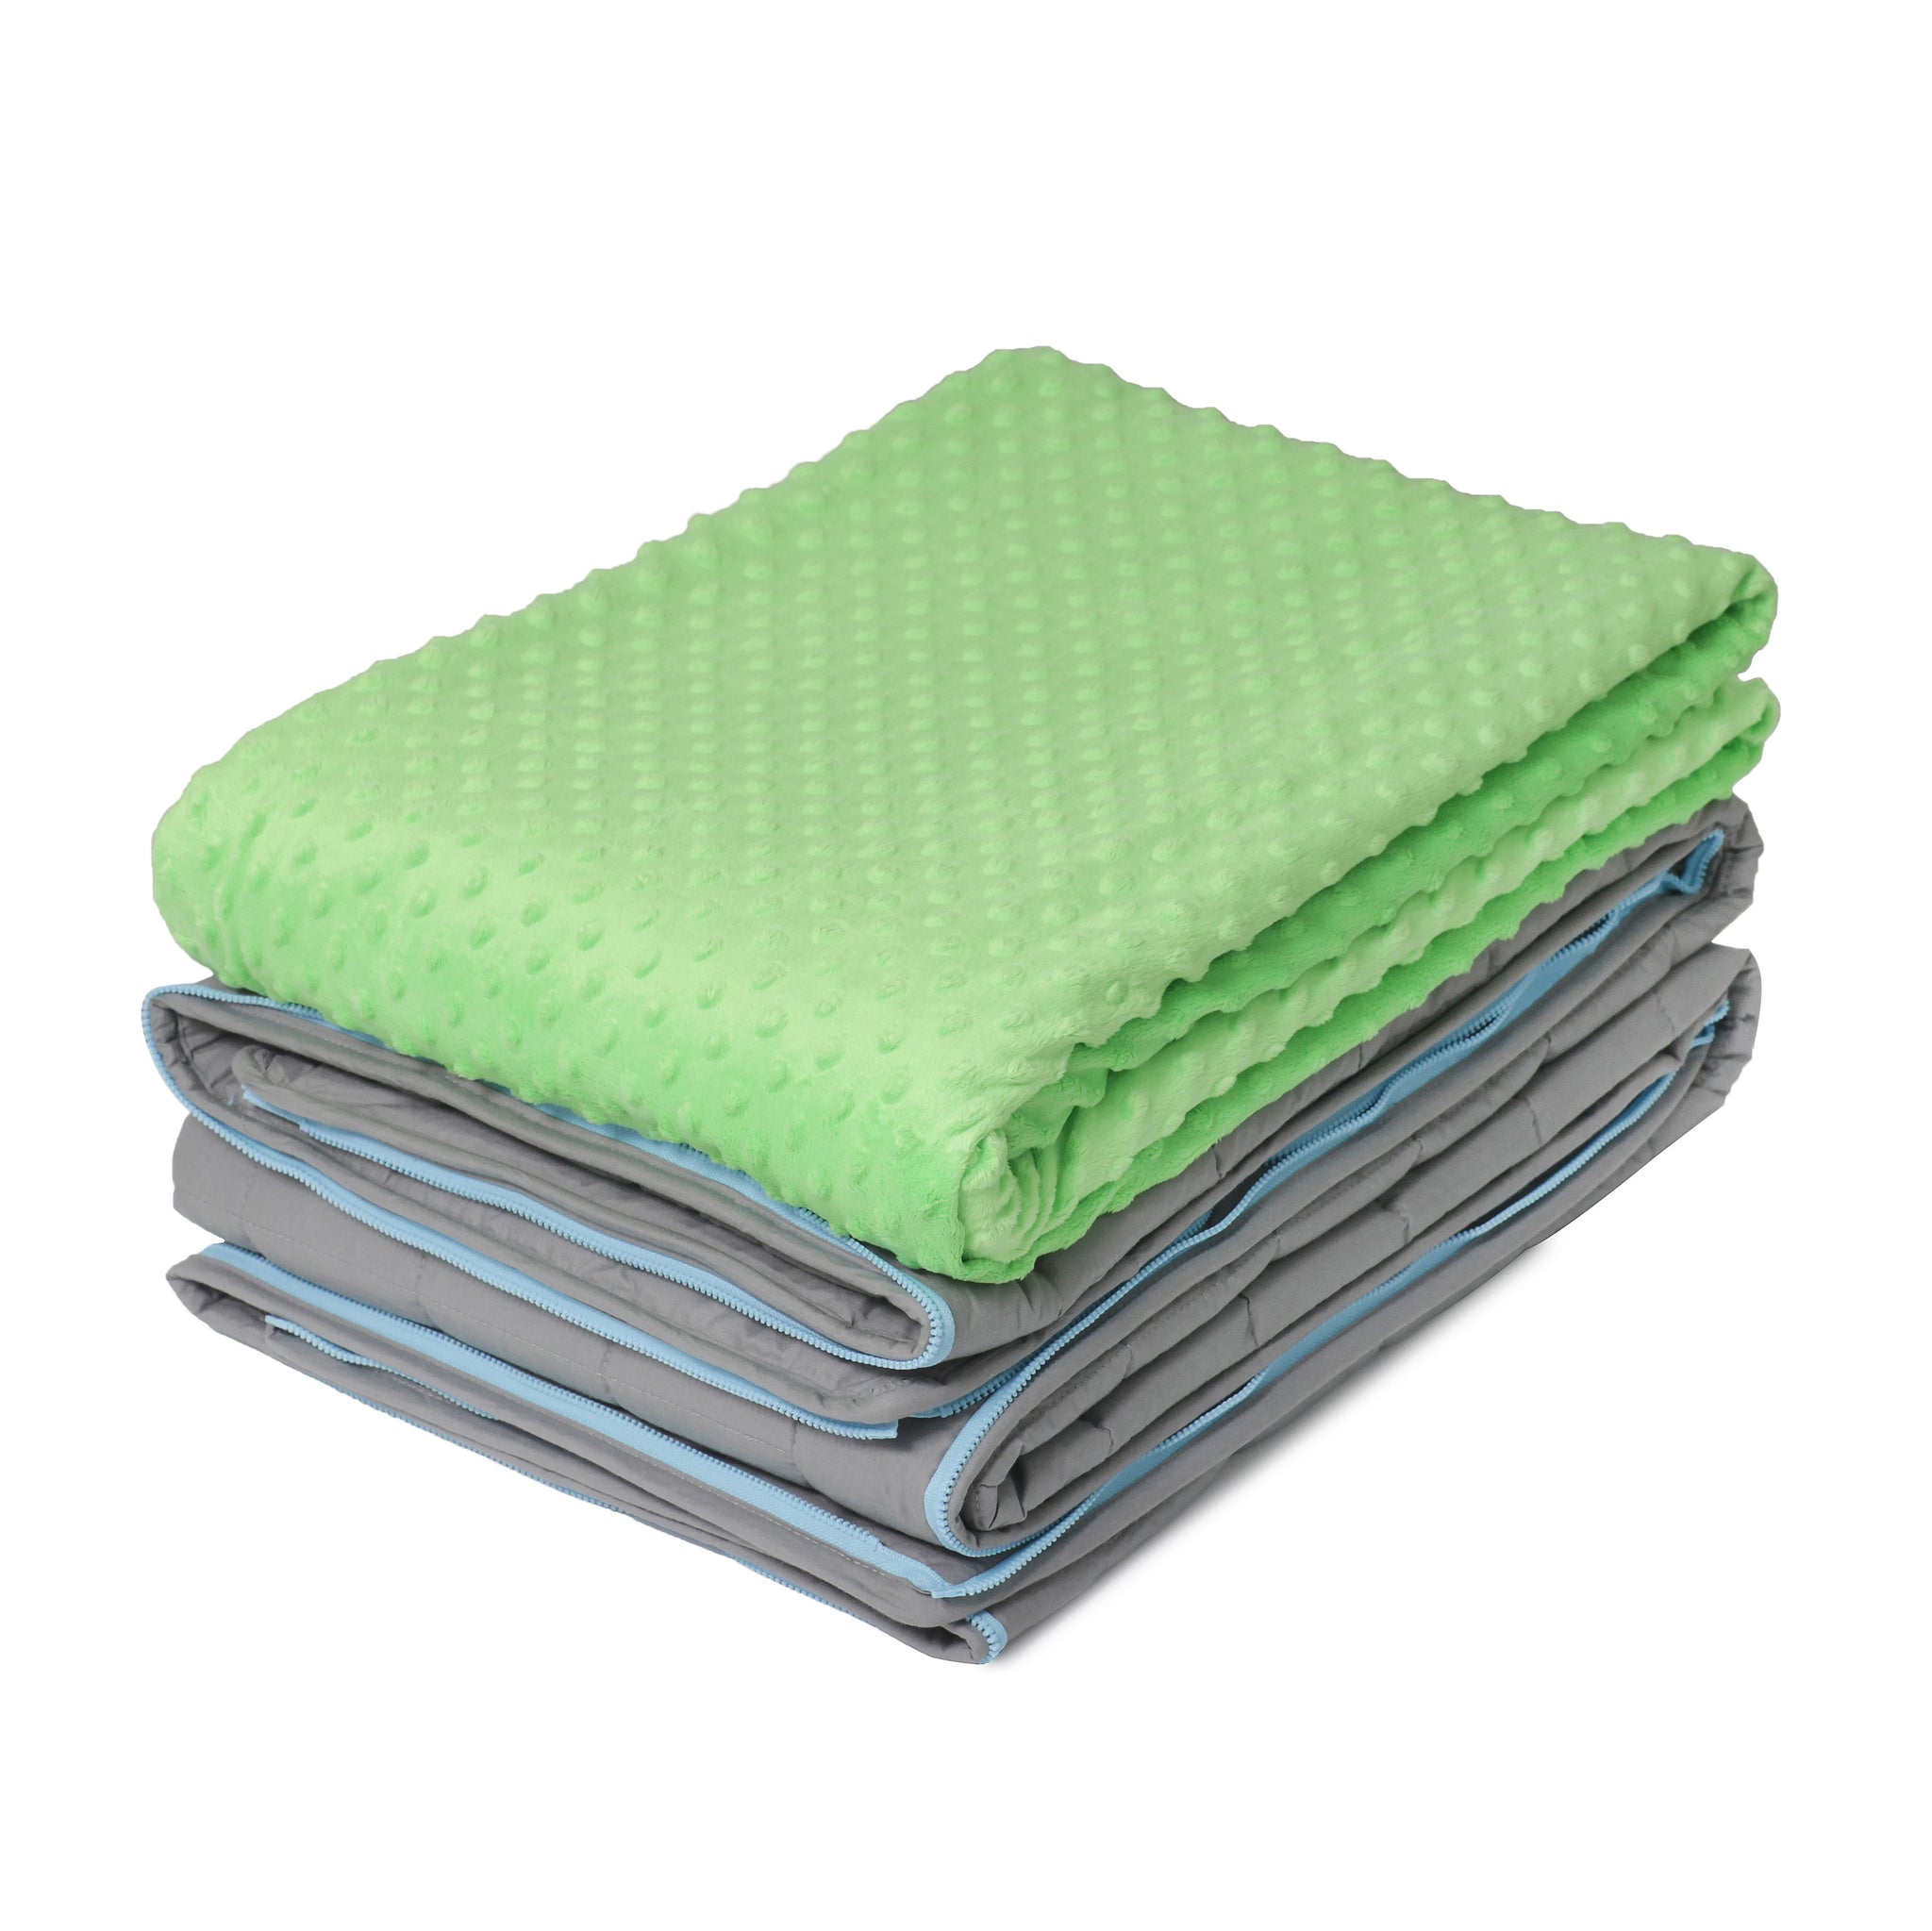 10 lb Weighted Blanket in Lime Green with Patented Zipper System